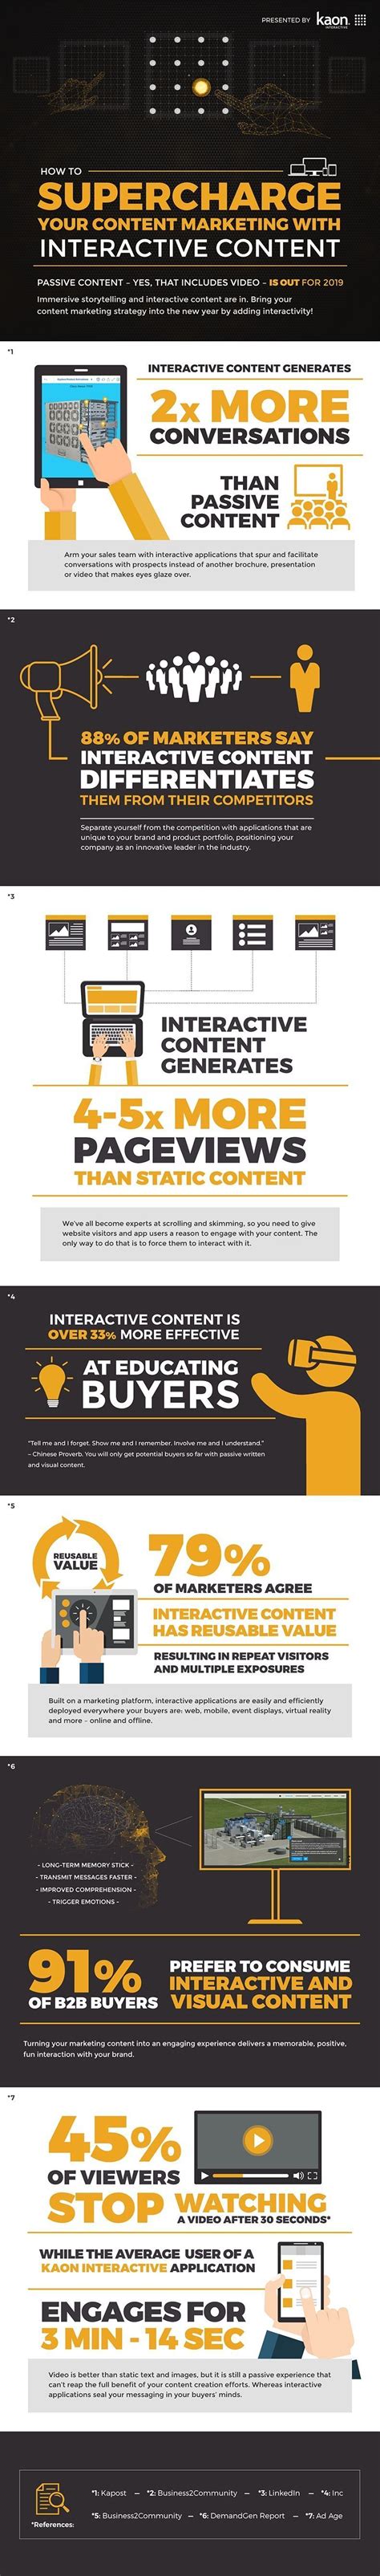 Content Infographic Supercharge Your Content Marketing With